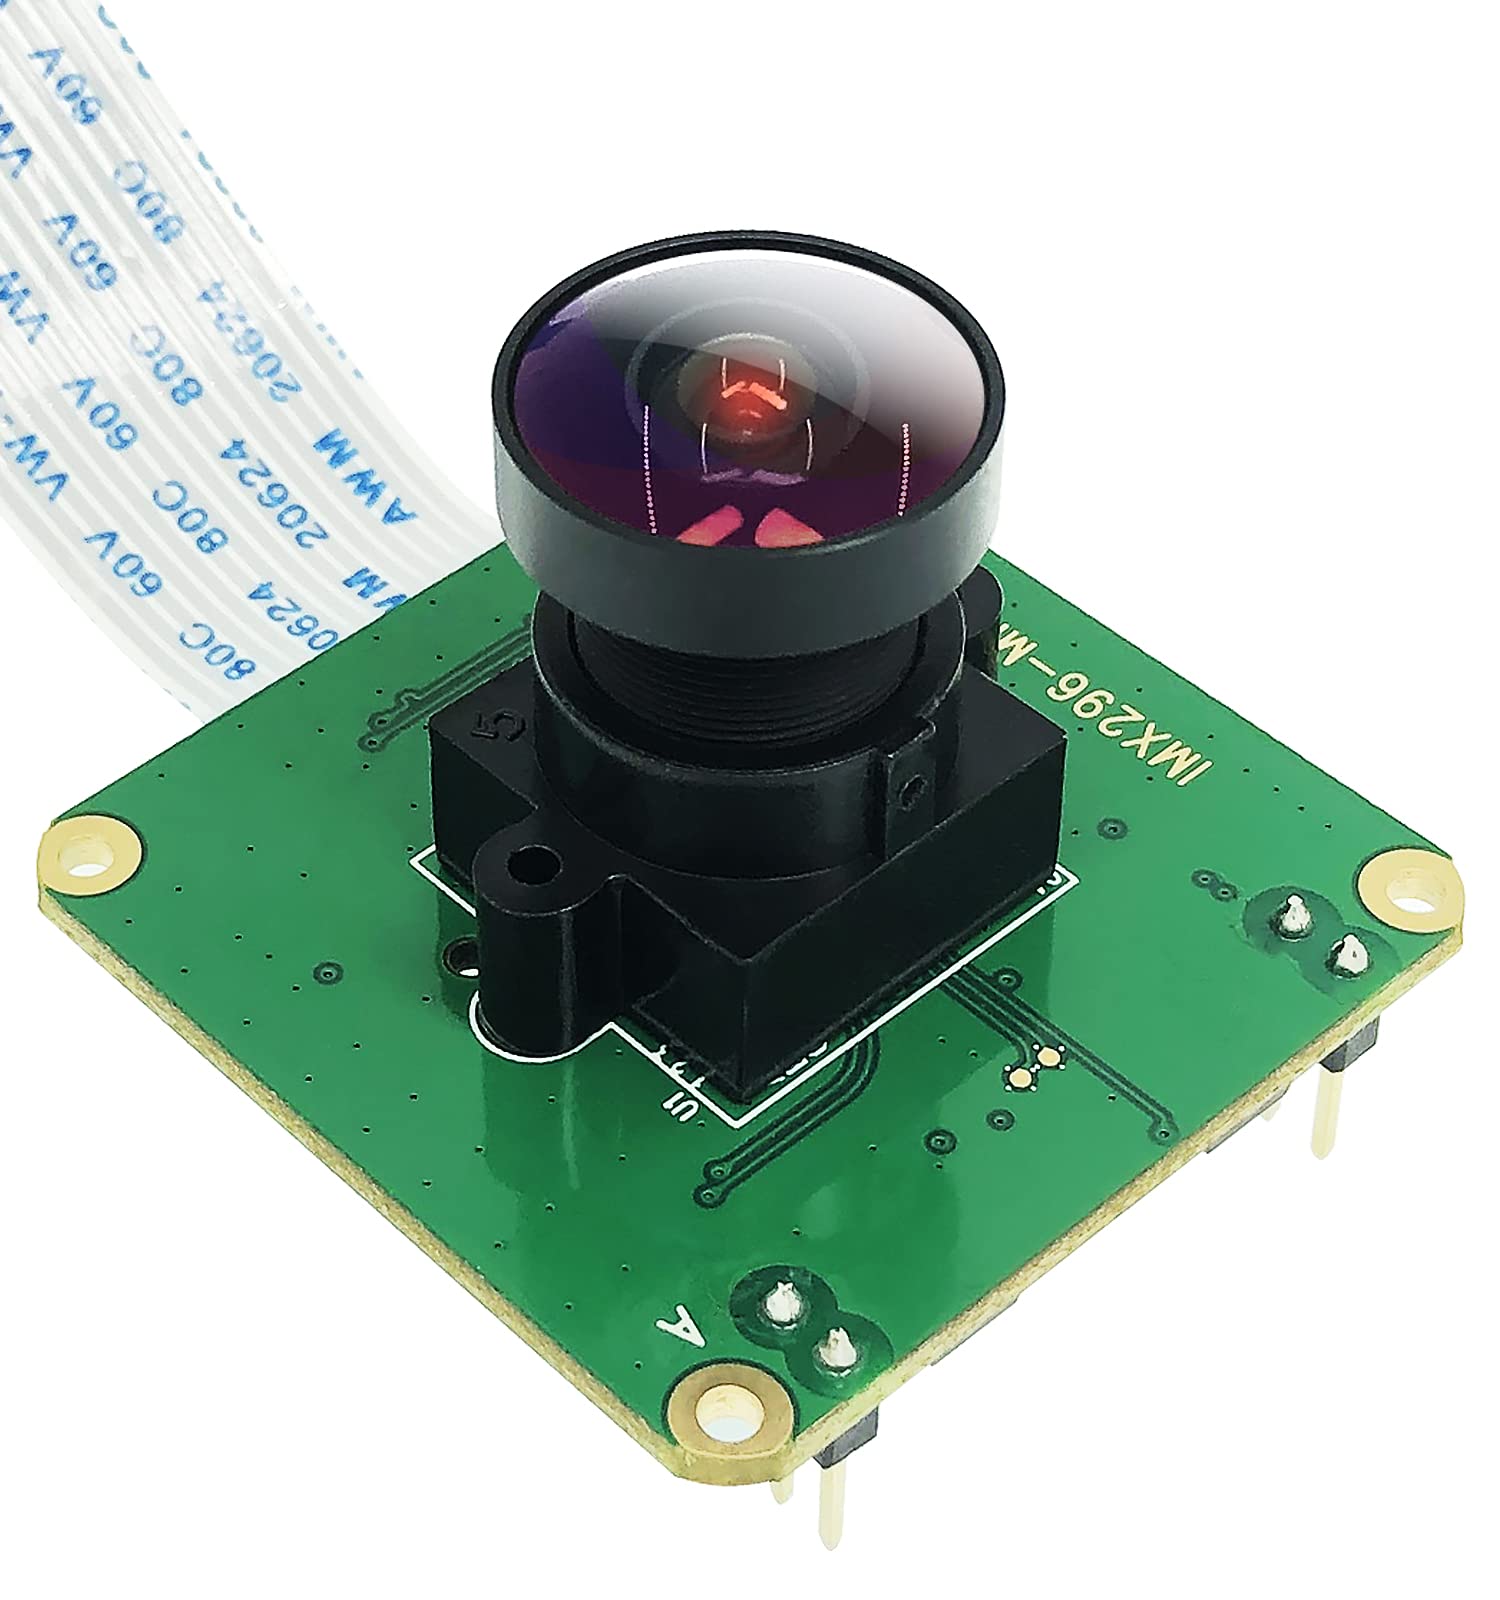 innomaker global Shutter Camera Module cam-imx296raw with Mono Sensor imx296 for Raspberry Pi with External Trigger Function Support max 60fps Resolution 1456x1088